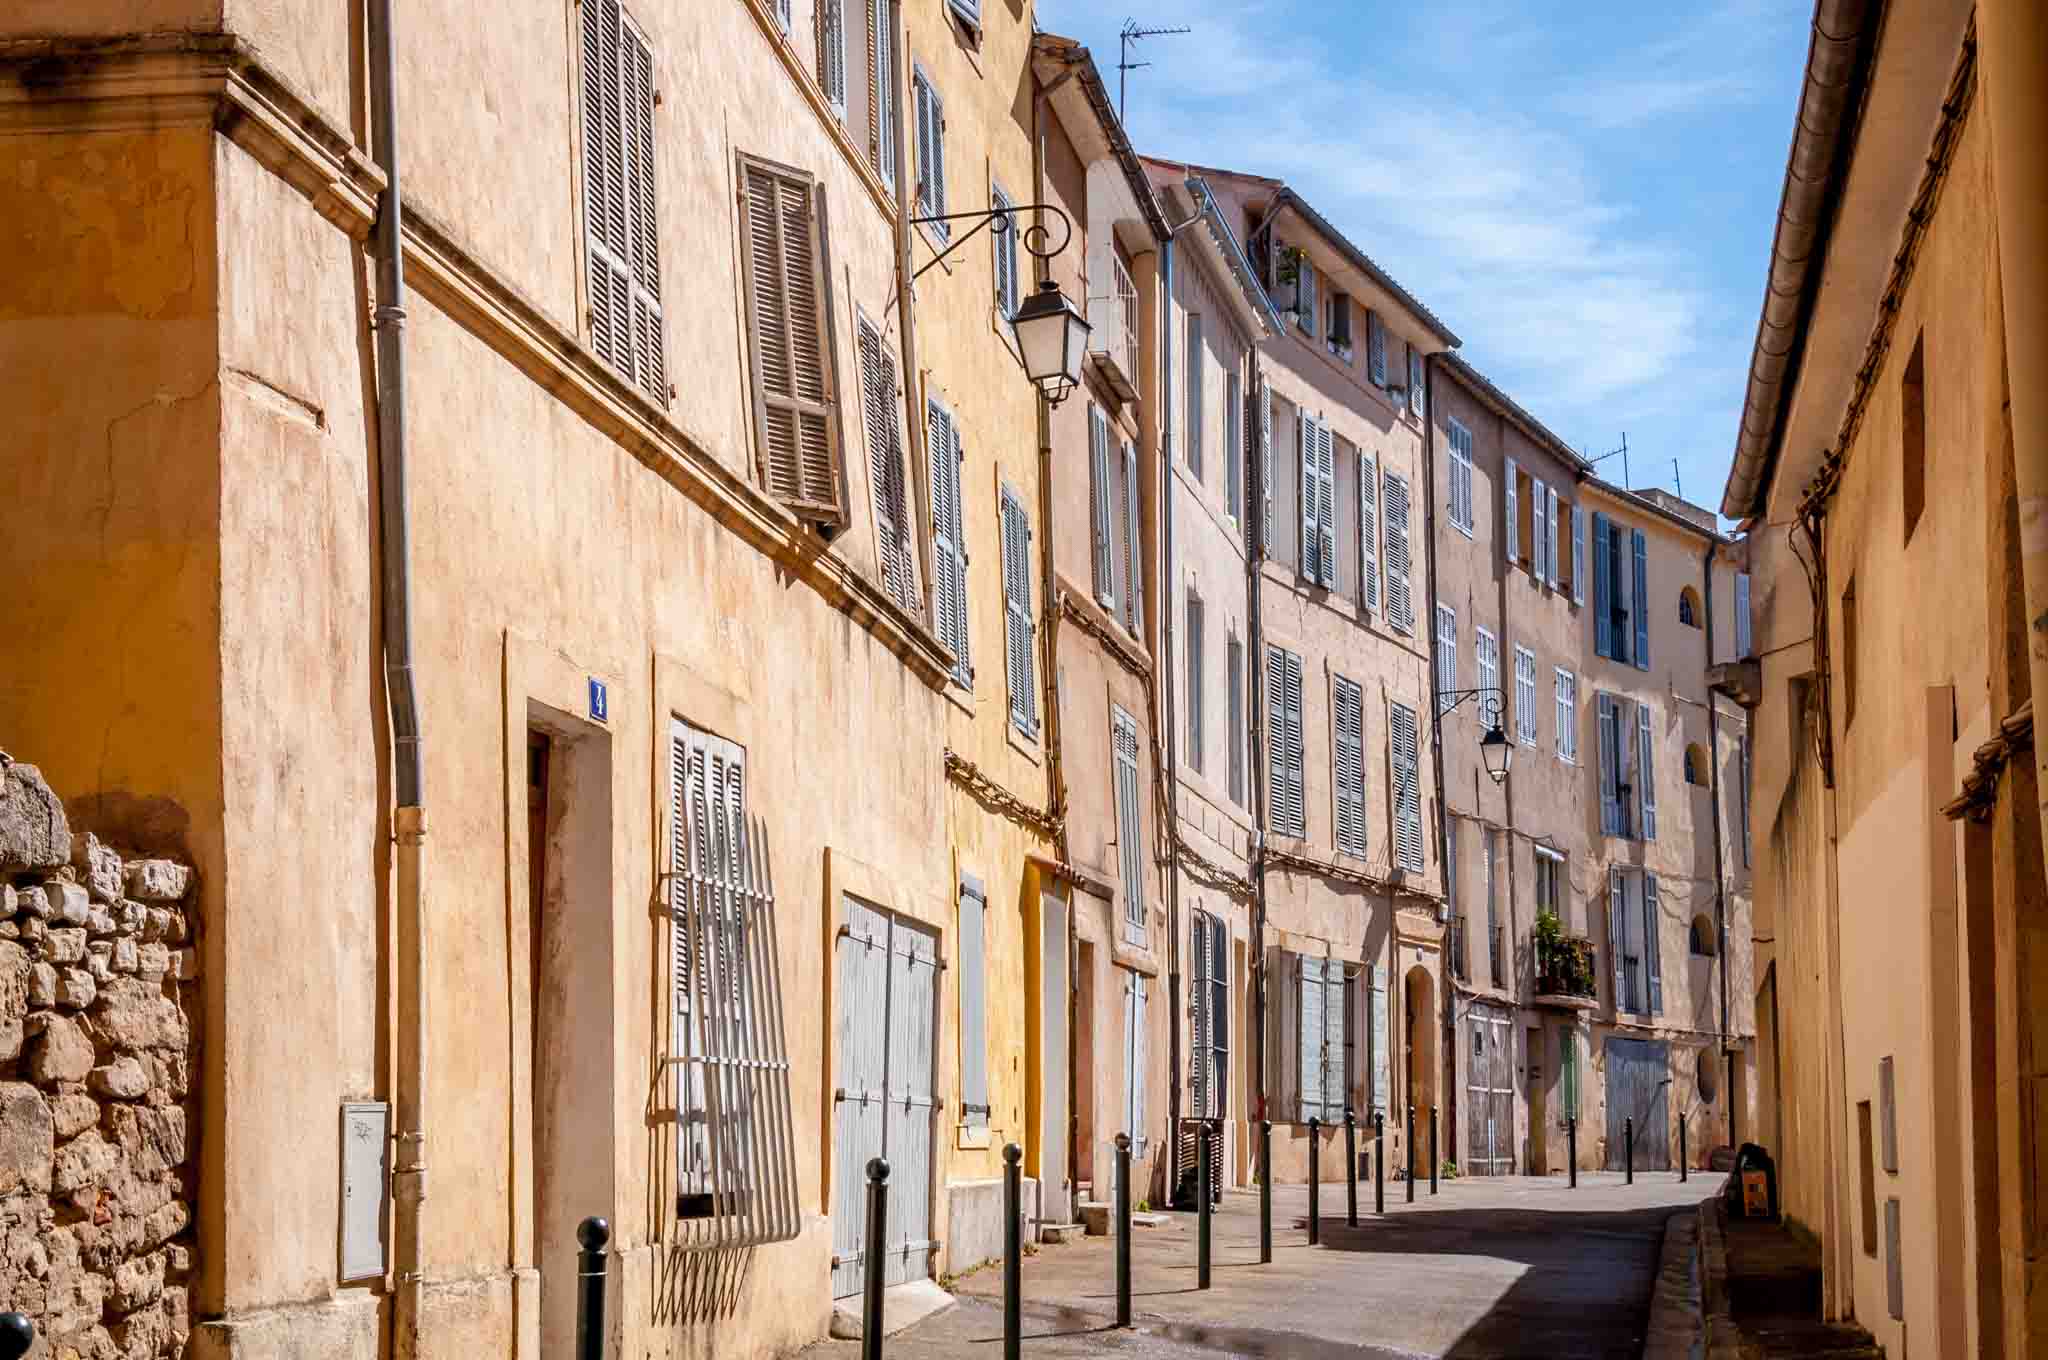 Peach and yellow buildings in Aix-en-Provence, France